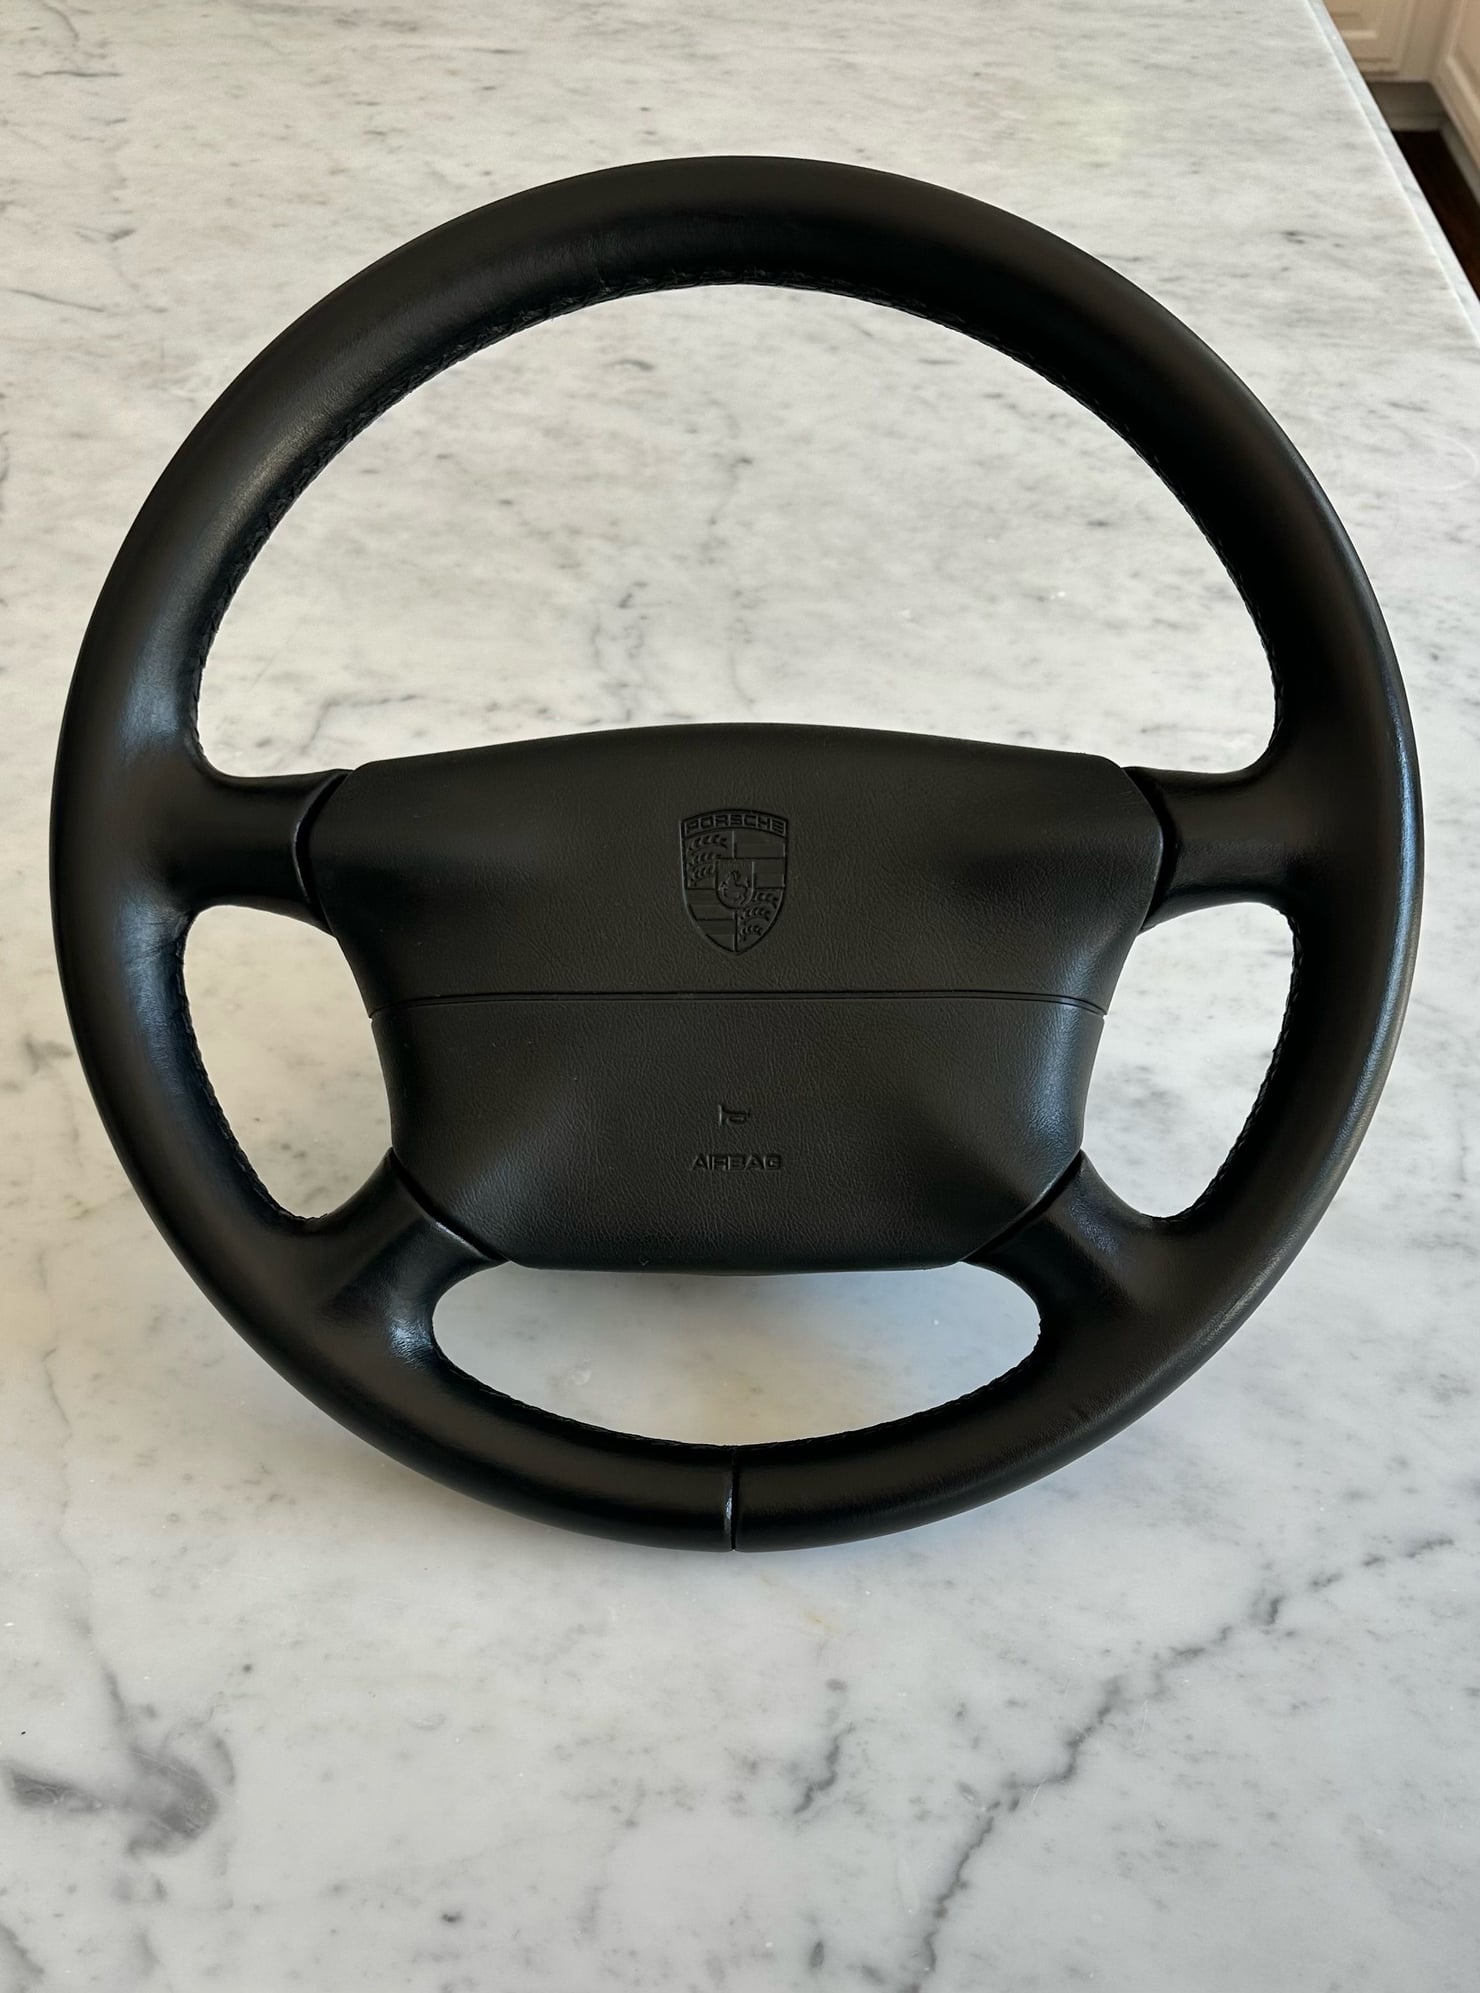 Interior/Upholstery - Porsche 986 911 993 996 Boxster 6 speed 4 spoke steering wheel excellent condition - Used - 0  All Models - Bentonville, AR 72712, United States